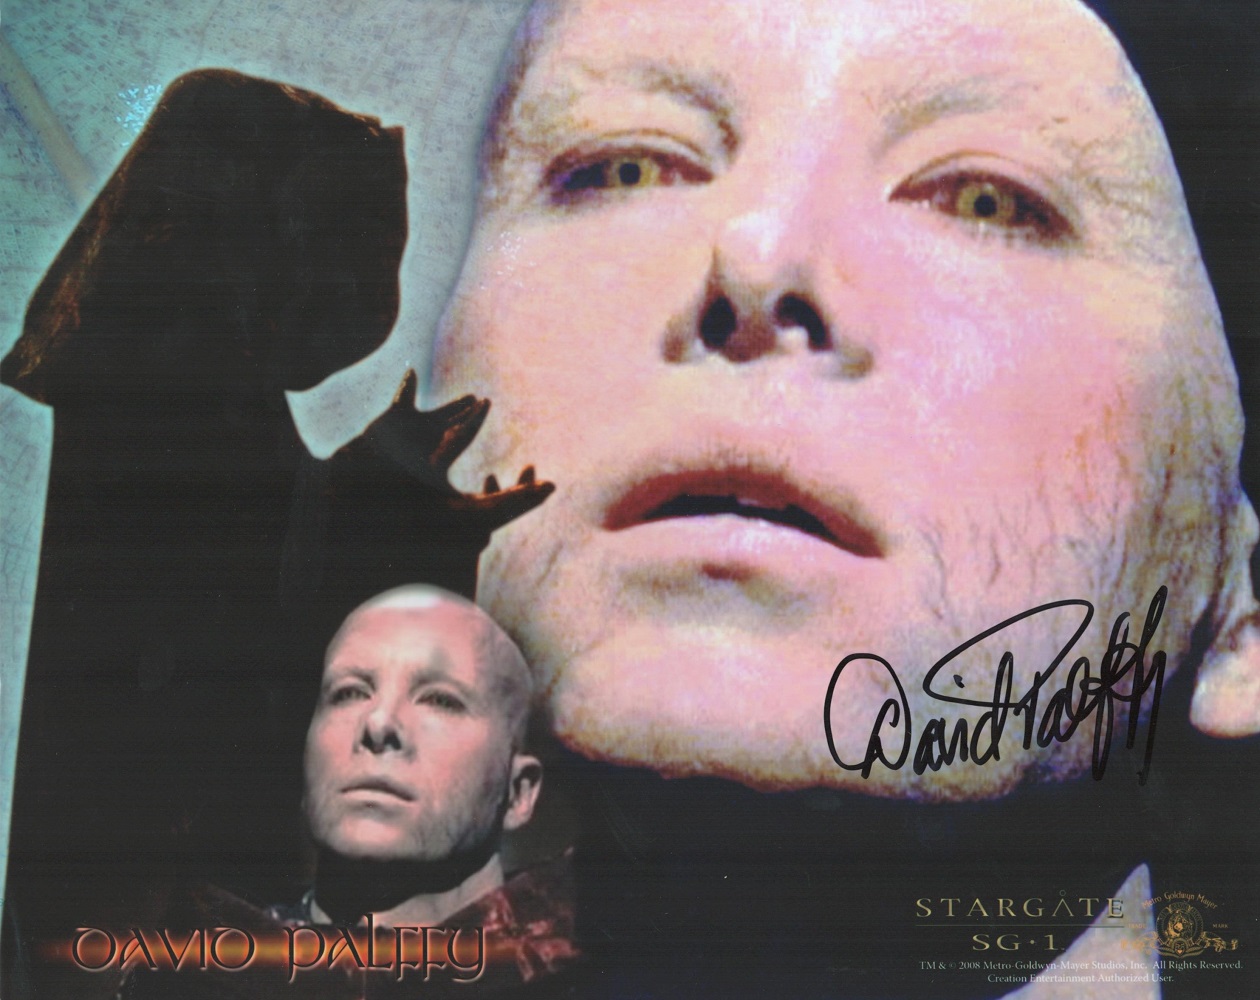 Stargate, David Palffy signed 10x8 colour promo photograph. Canadian film and television actor